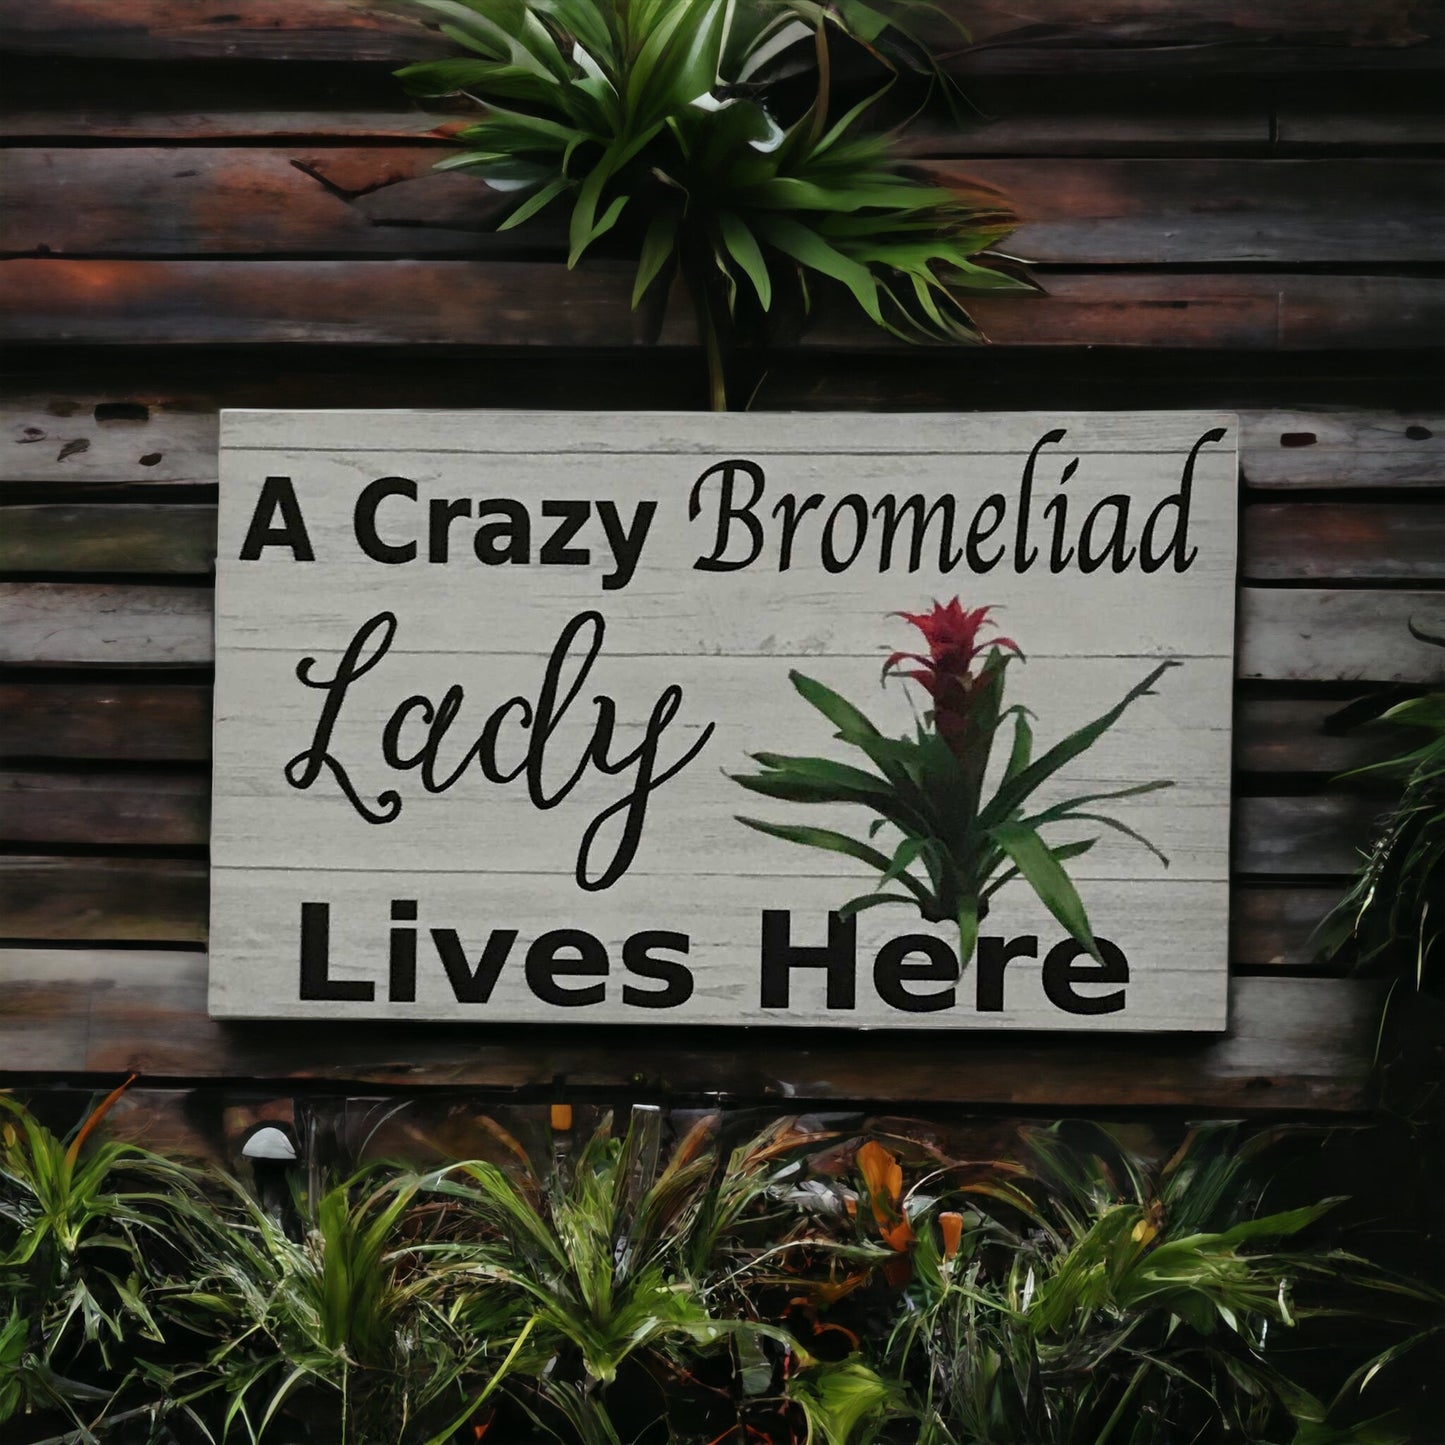 Crazy Bromeliad Lady Lives Here Sign - The Renmy Store Homewares & Gifts 